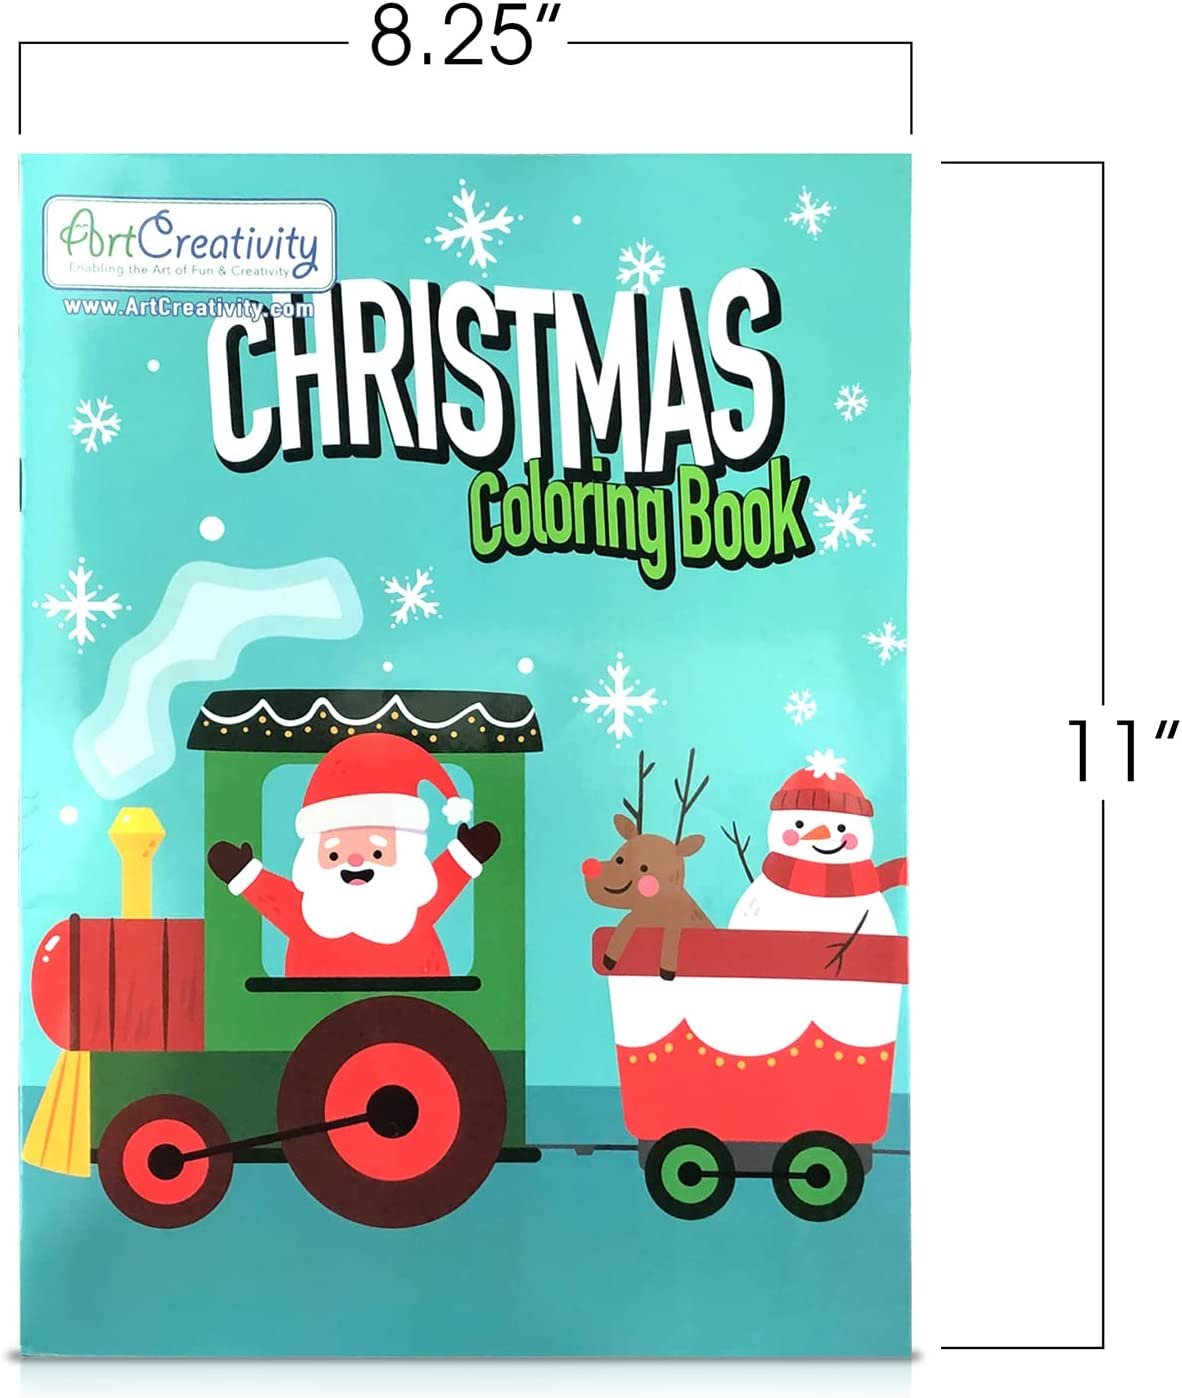 Christmas Coloring Books for Kids, Pack of 12, 8.25" x 11" Big Booklets, Fun Christmas Treats Prizes, Favor Bag Fillers, Birthday Party Supplies, Art Gifts for Boys and Girls